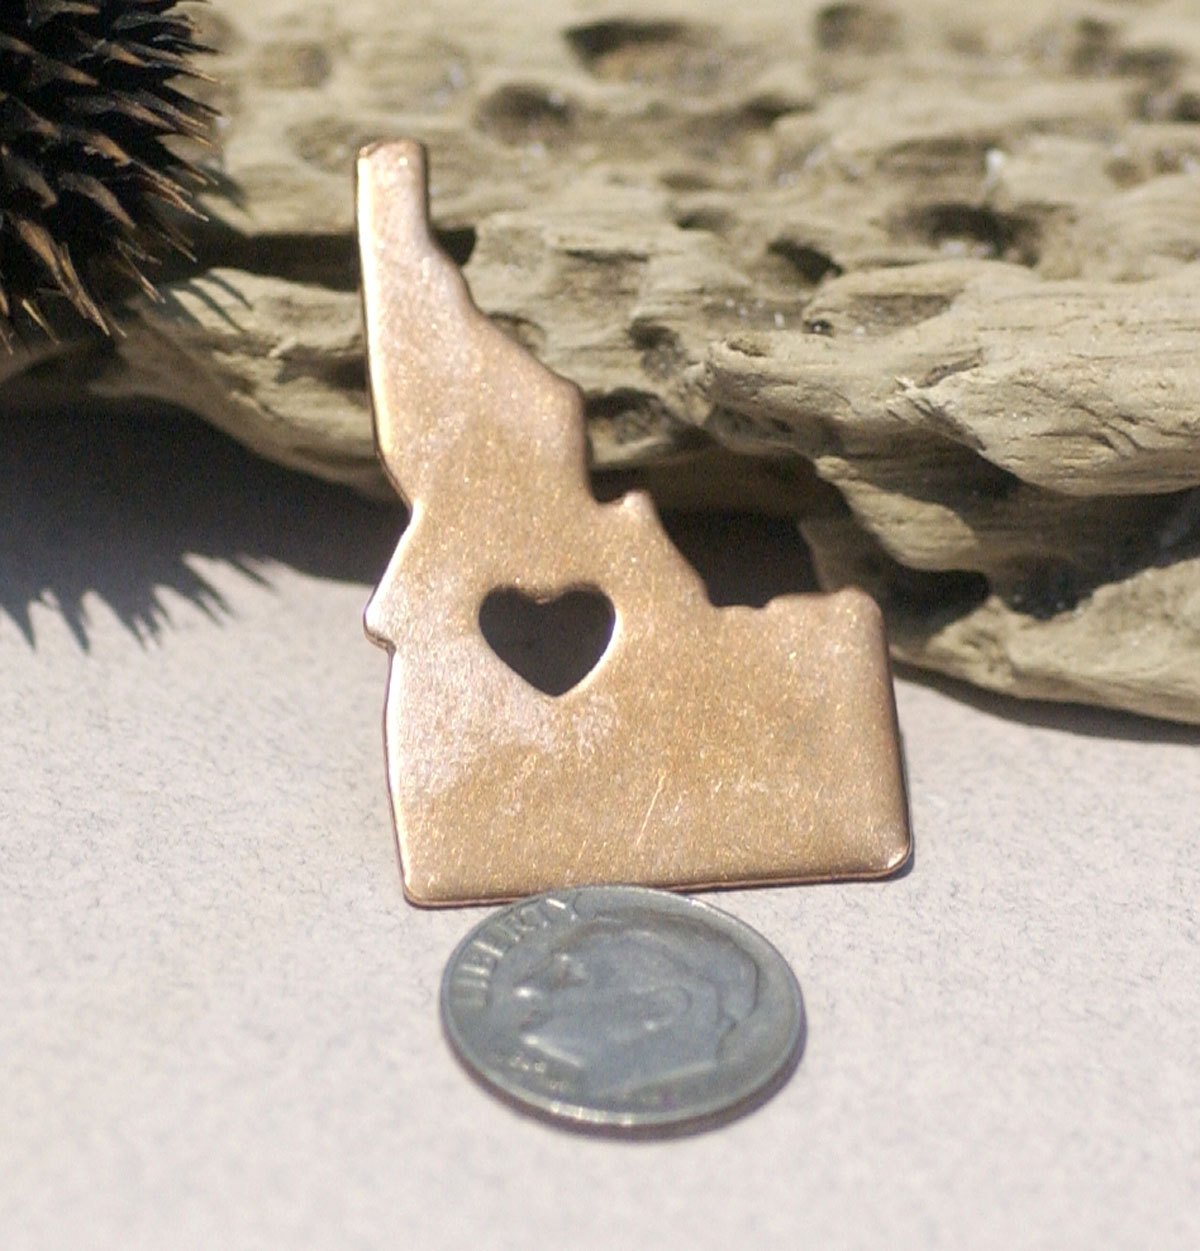 Idaho State With Heart Chubby 6.6mm Cutout for Enameling Metalworking Stamping Texturing Blank Variety of Metals